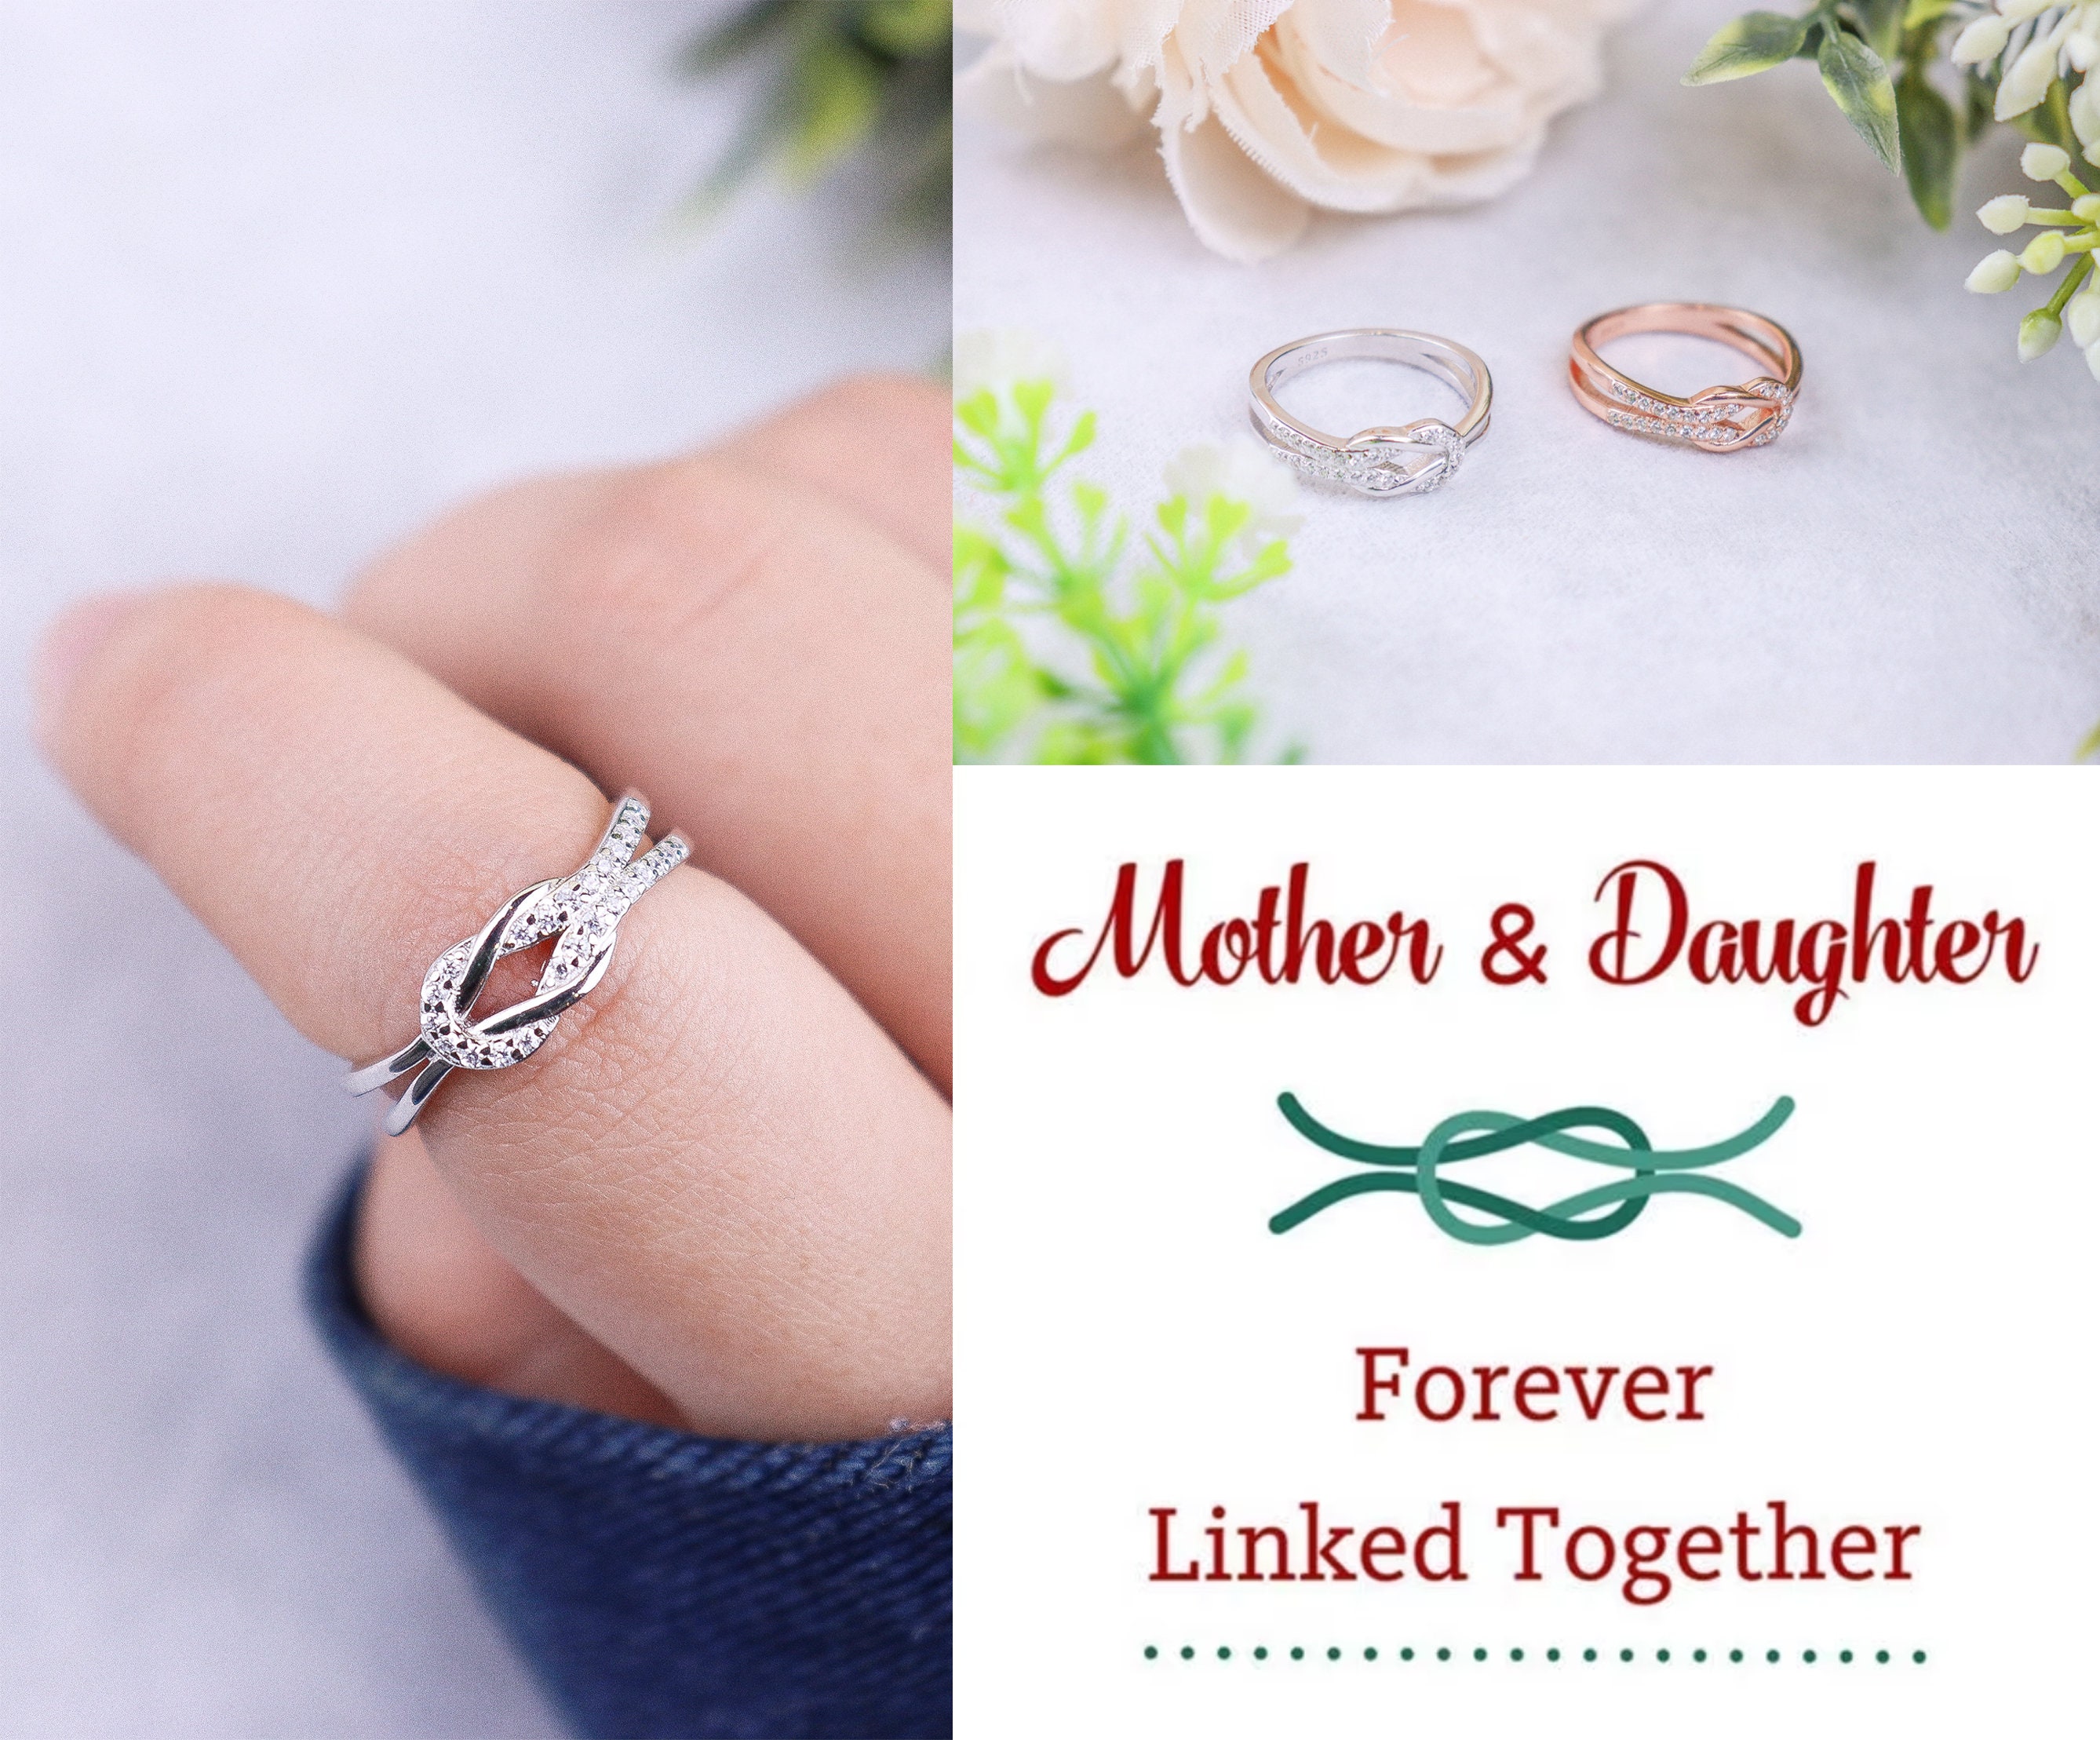 Together For Always Engraved Birthstone Family Ring